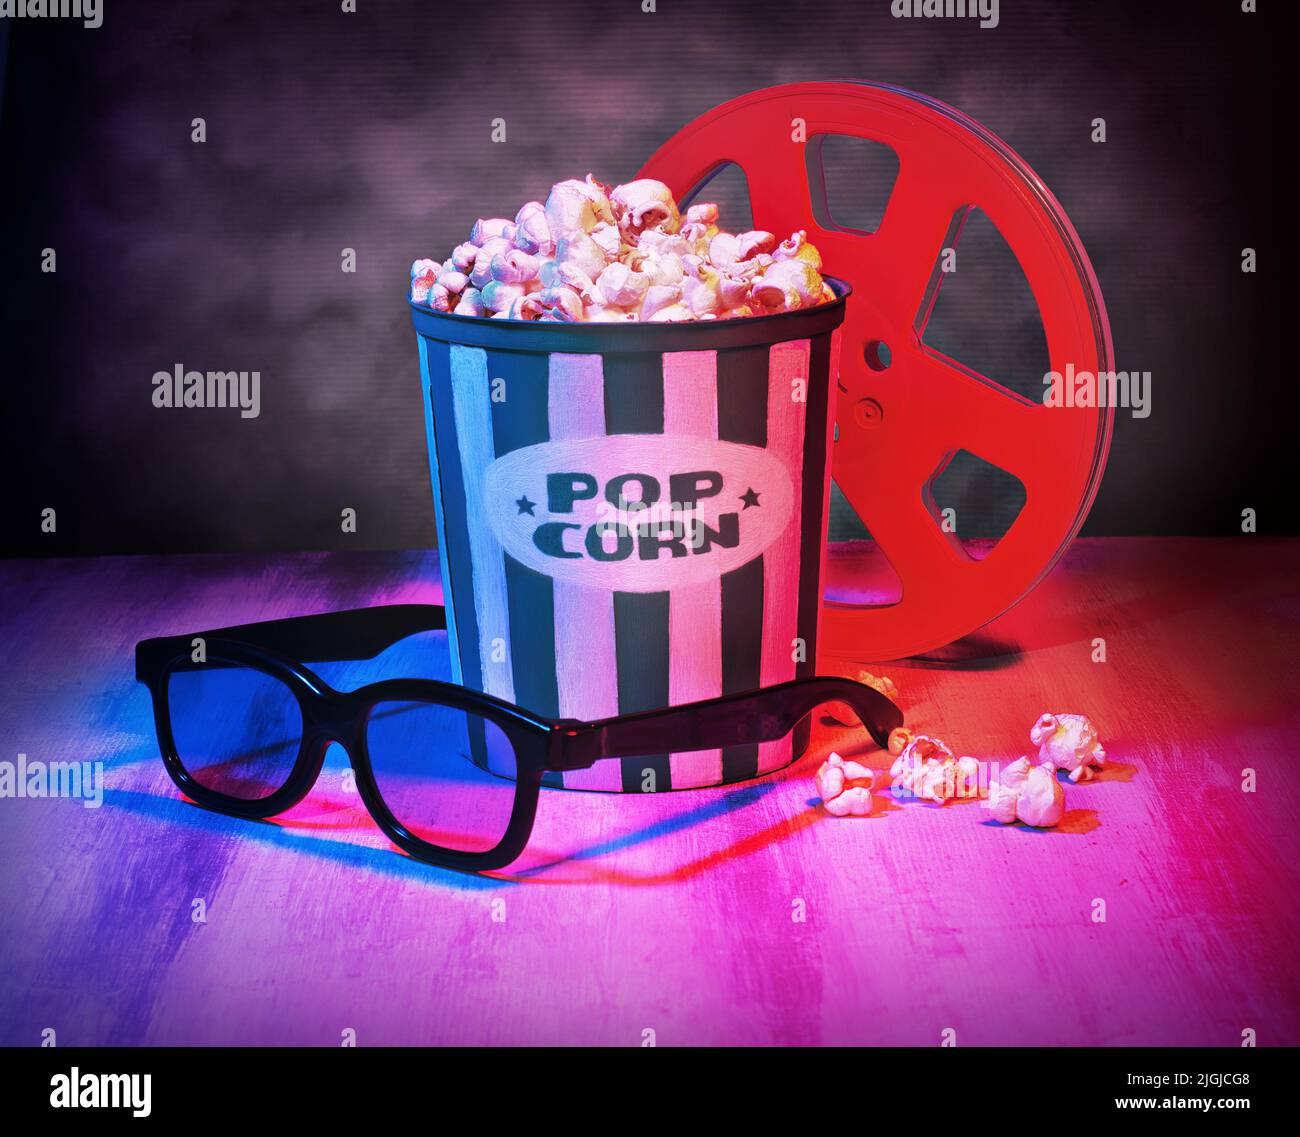 Cinema movies concept with a pop corn bucket, 3D glasses and film tape reel. Movie night template symbol table top shot, with a purple retro aesthetic Stock Photo